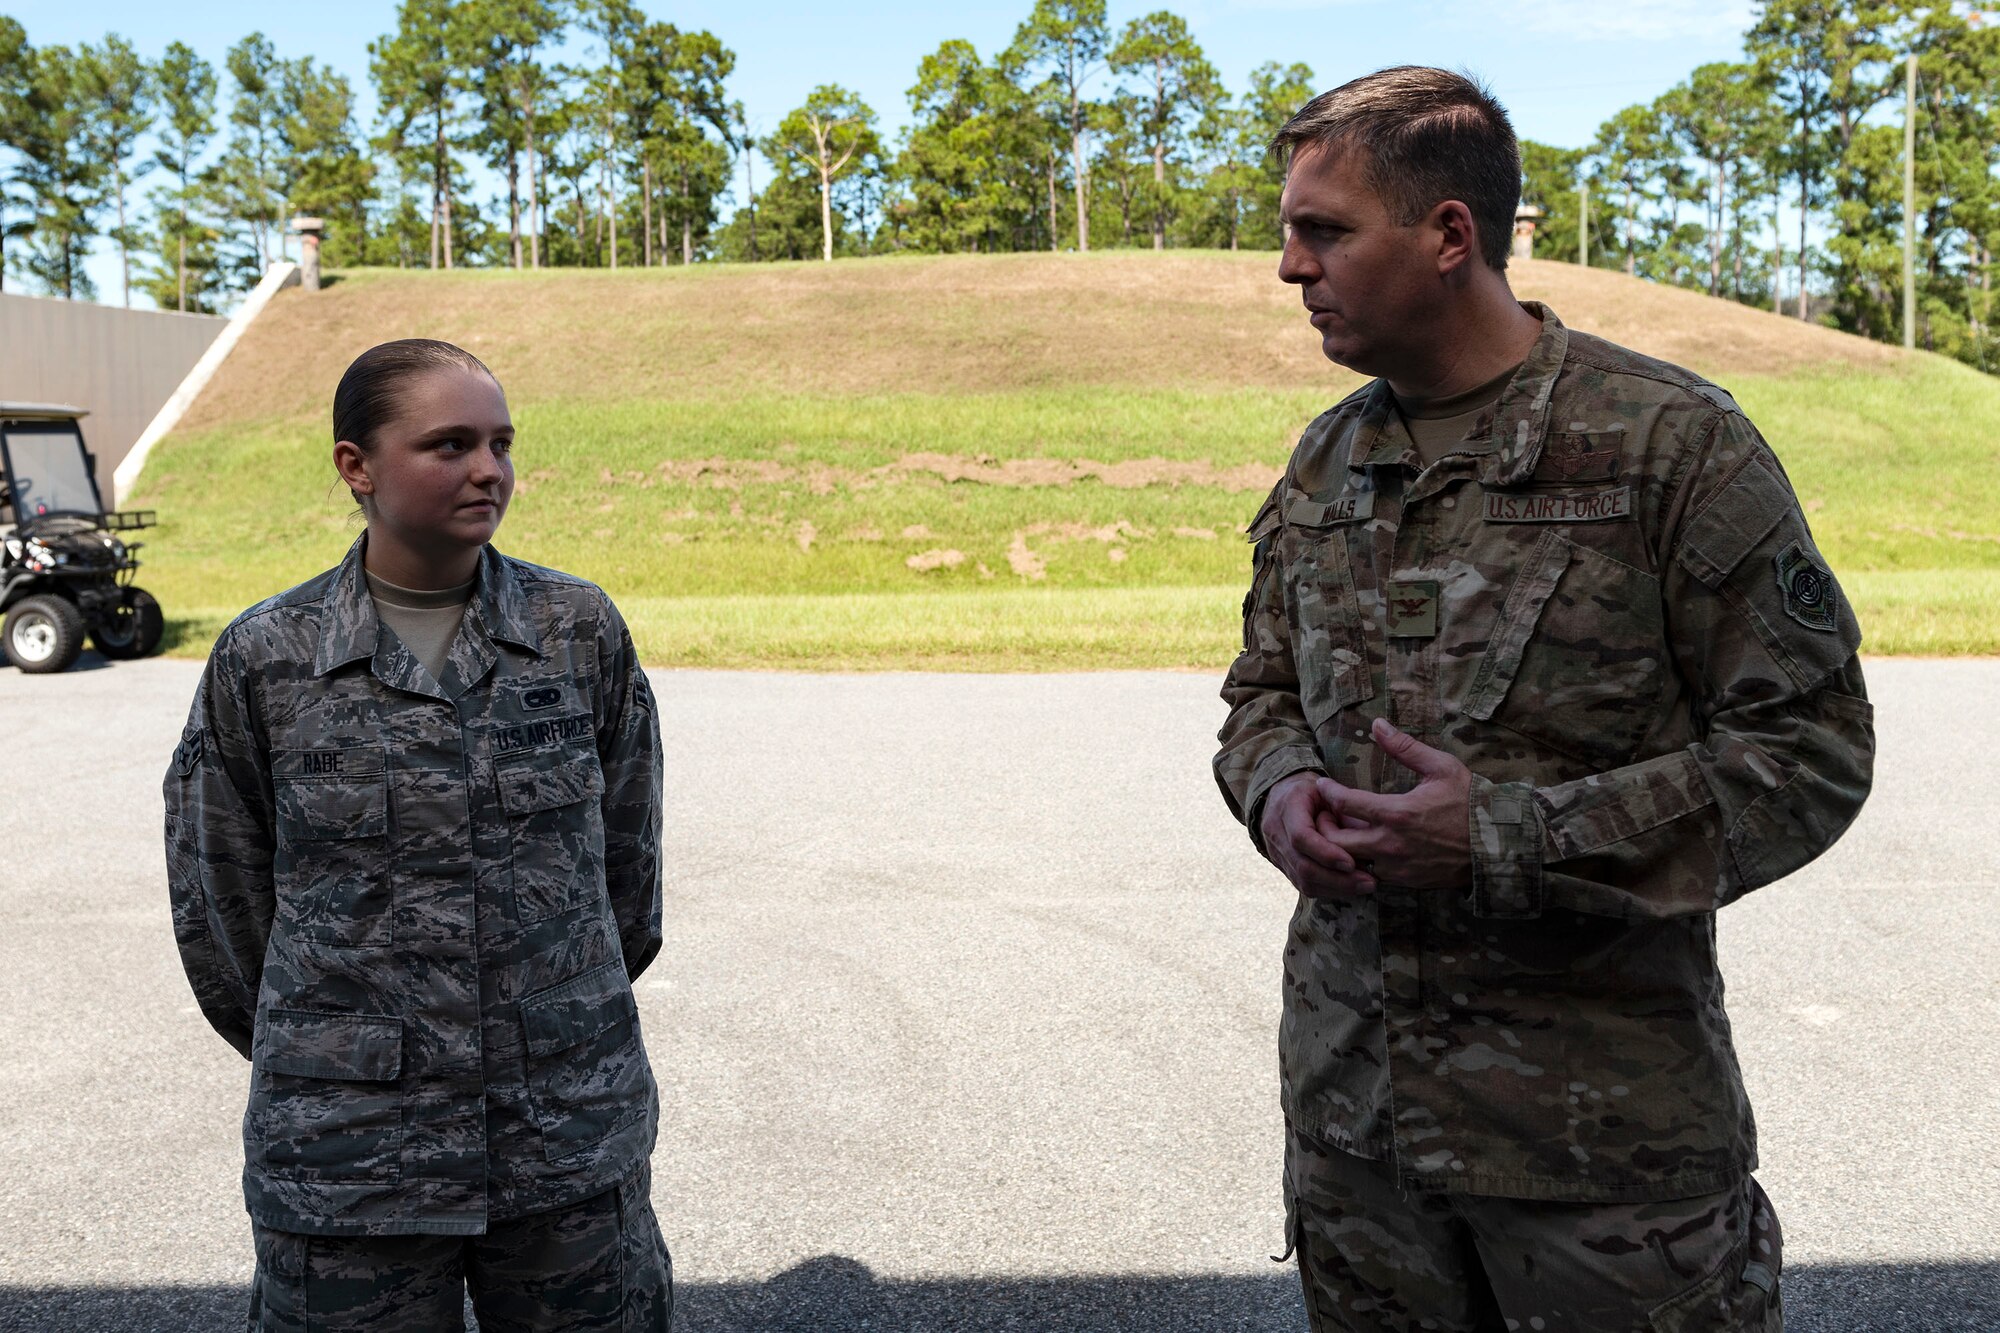 Col. Dan Walls, right, 23d Wing commander, speaks to Airman 1st Class Lindlie Rabe, 23d Maintenance Squadron (MXS) stockpile management technician, during an immersion tour Oct. 28, 2019, at Moody Air Force Base, Ga. Walls toured the 23d MXS munitions flight facilities, where the Airmen showcased their squadron and mission. This gave Walls the opportunity to see how 23d MXS improves deployability and ensures mission readiness. (U.S. Air Force photo by Senior Airman Erick Requadt)